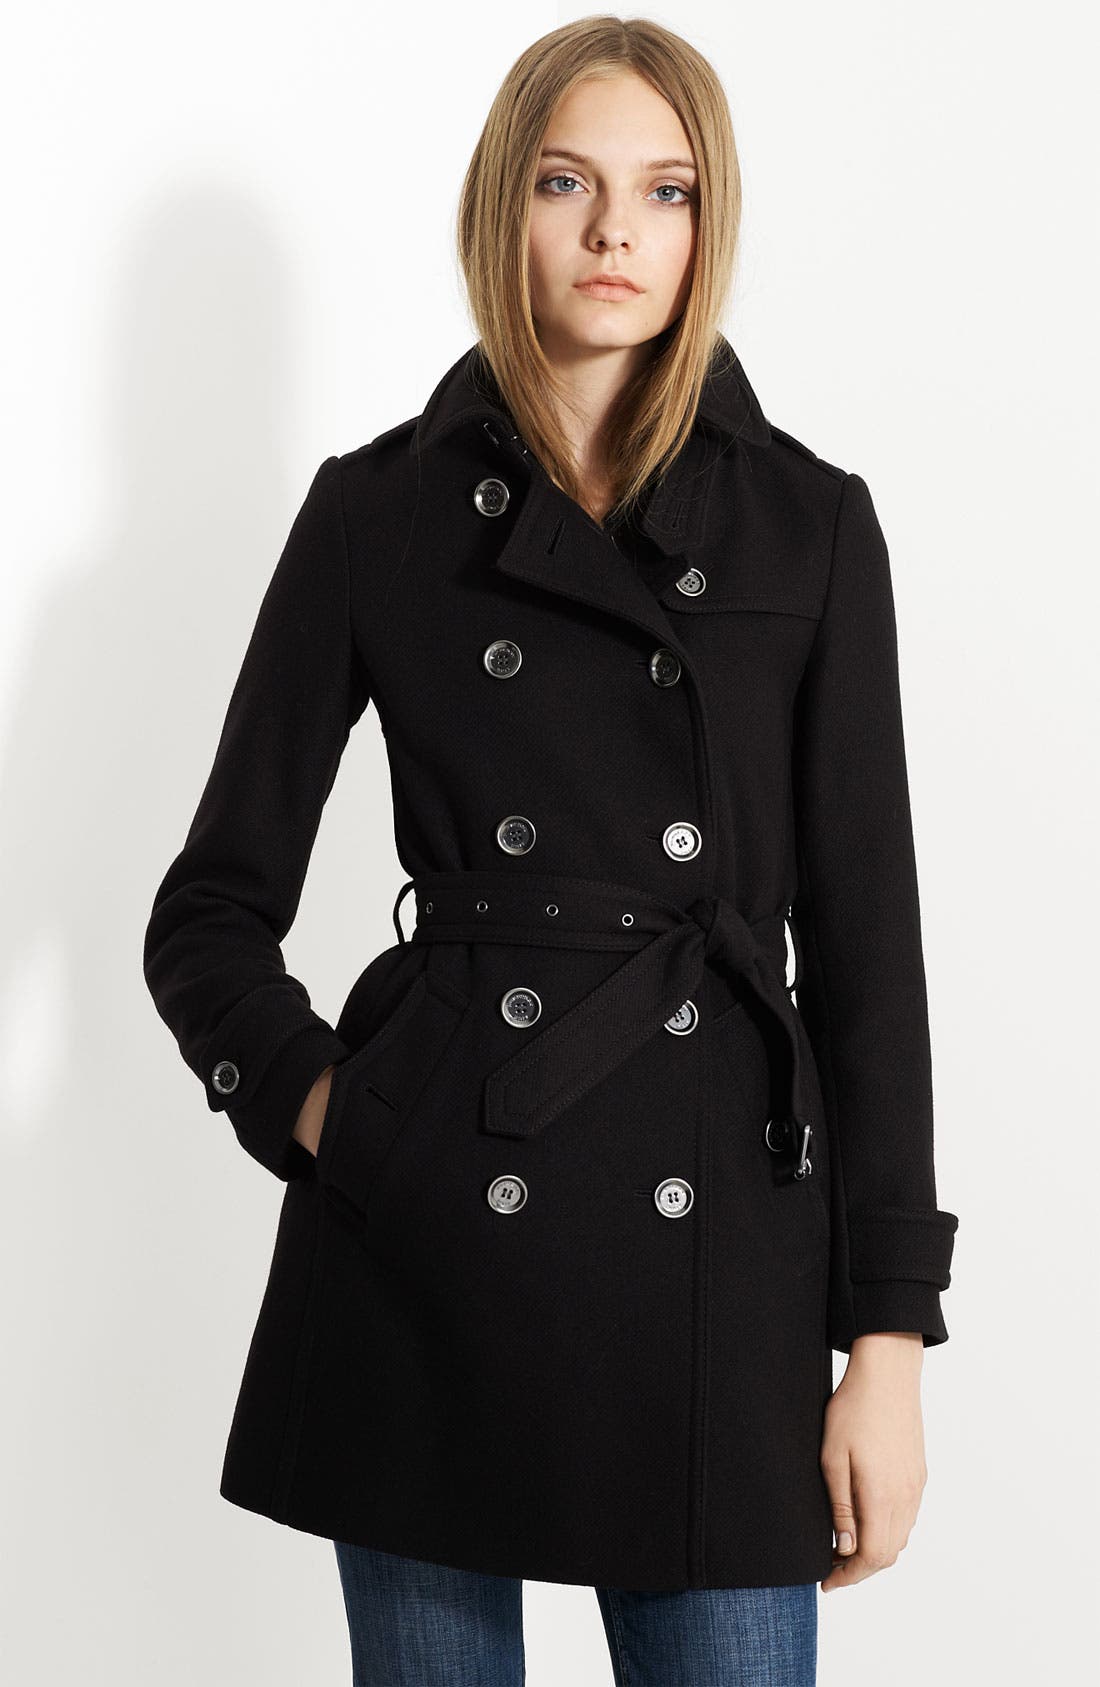 Balmoral' Wool Blend Trench Coat 